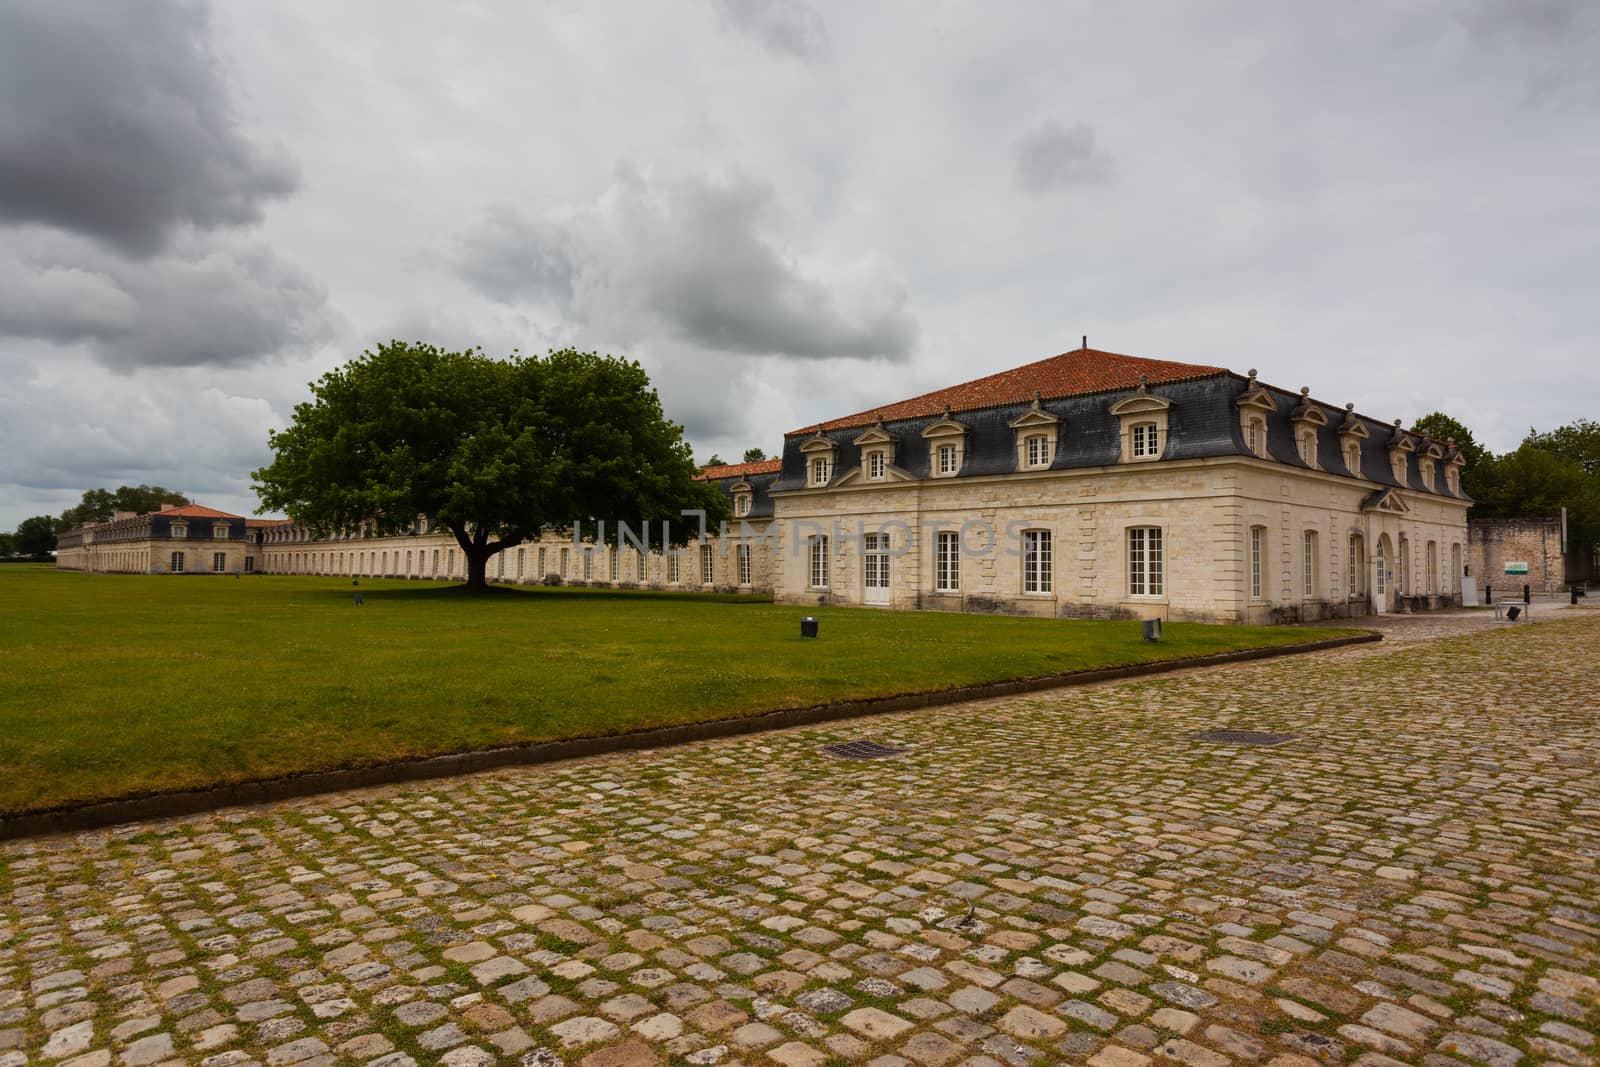 Full view of the corderie royale historical monument in the city of Rochefort charente maritime region of France